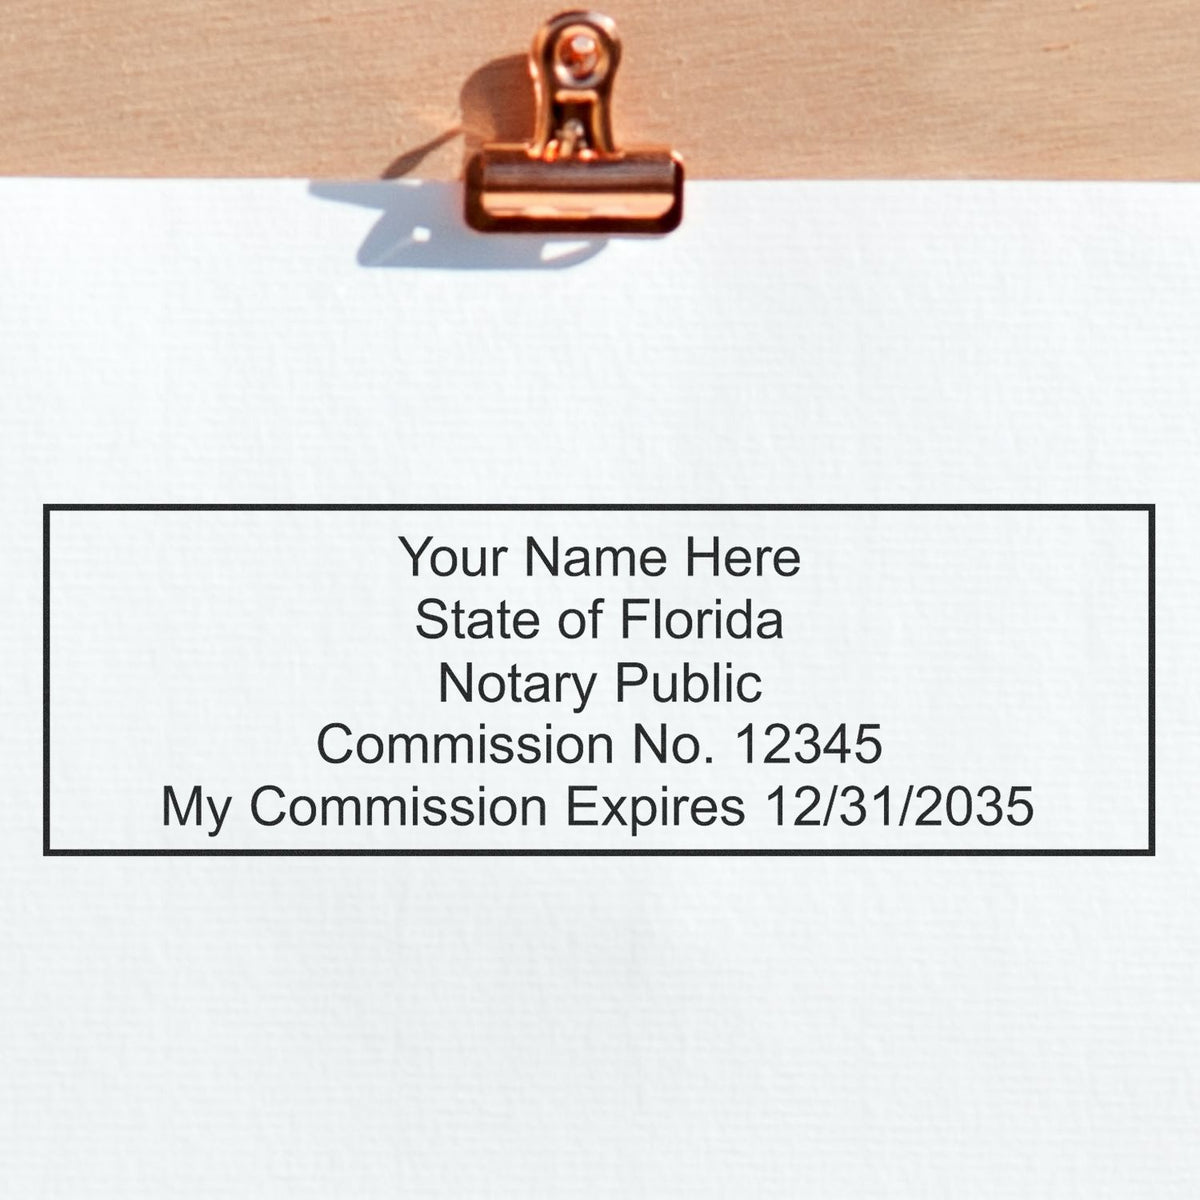 A lifestyle photo showing a stamped image of the Wooden Handle Florida Rectangular Notary Public Stamp on a piece of paper